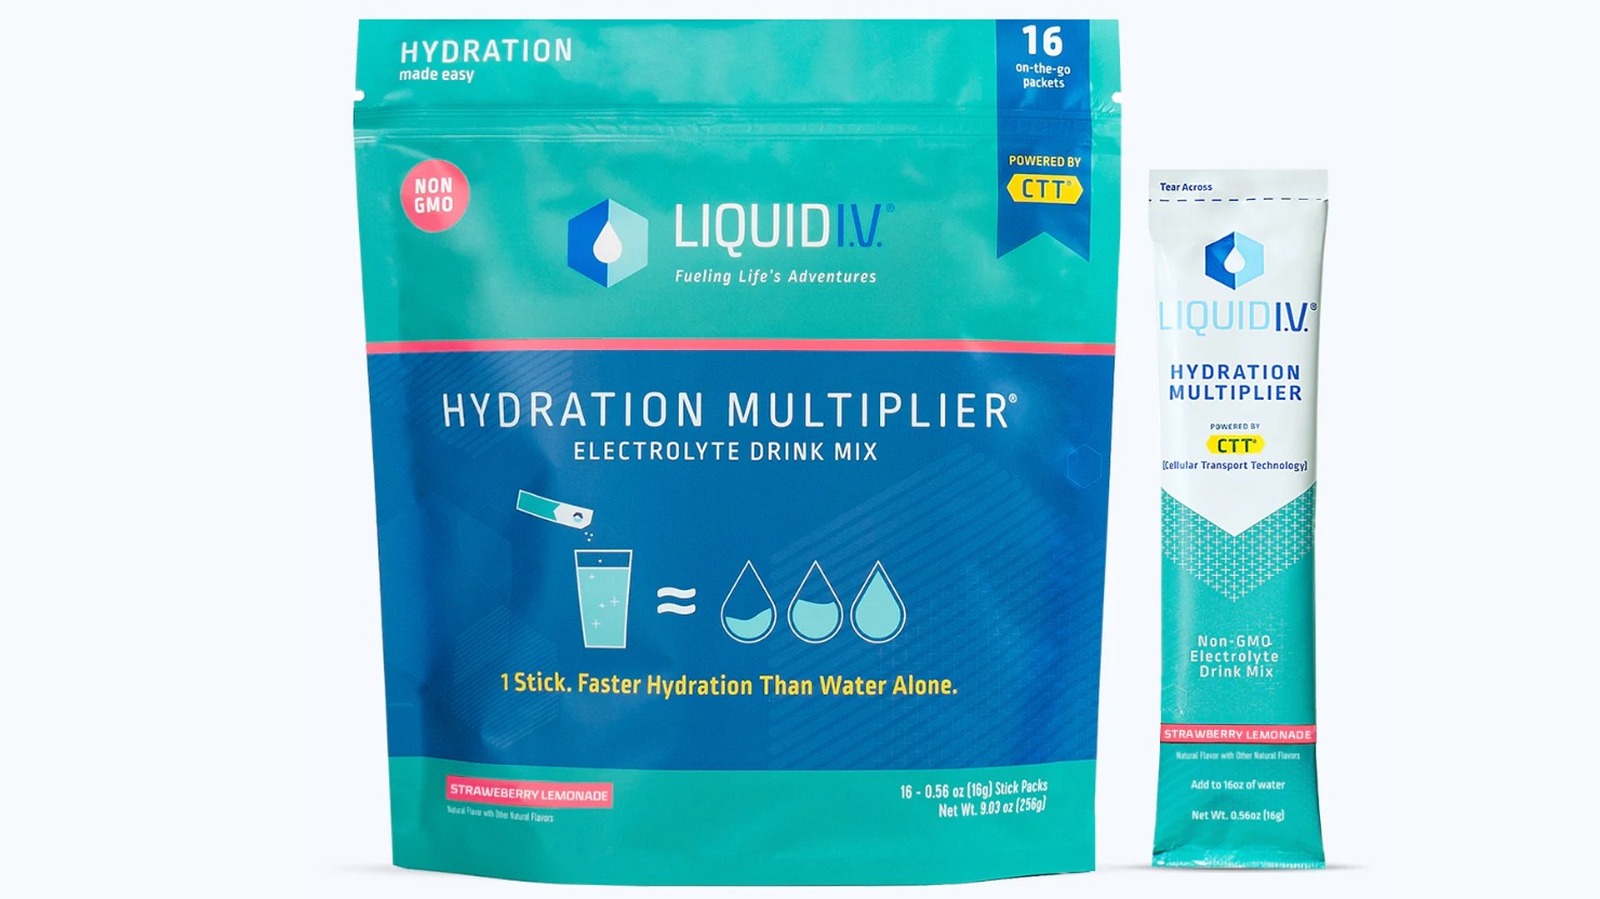 https://www.foodrepublic.com/img/gallery/the-gluten-controversy-surrounding-liquid-iv-hydration-packets/l-intro-1687445747.jpg